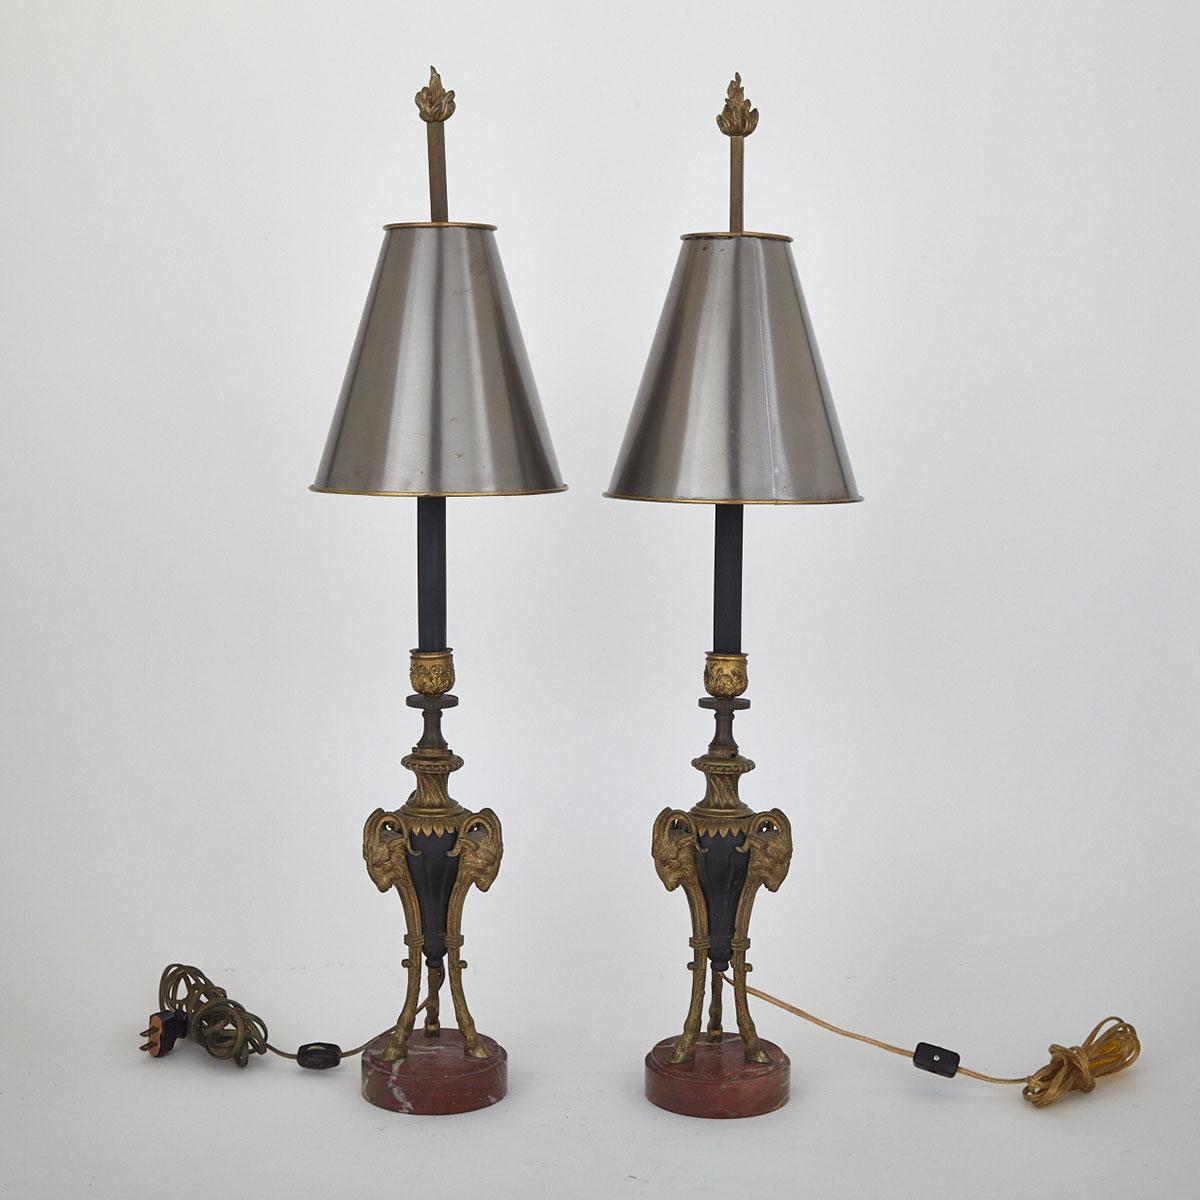 Pair of Louis XVI Style Gilt and Patinated Bronze Cassolette Form Table Lamps